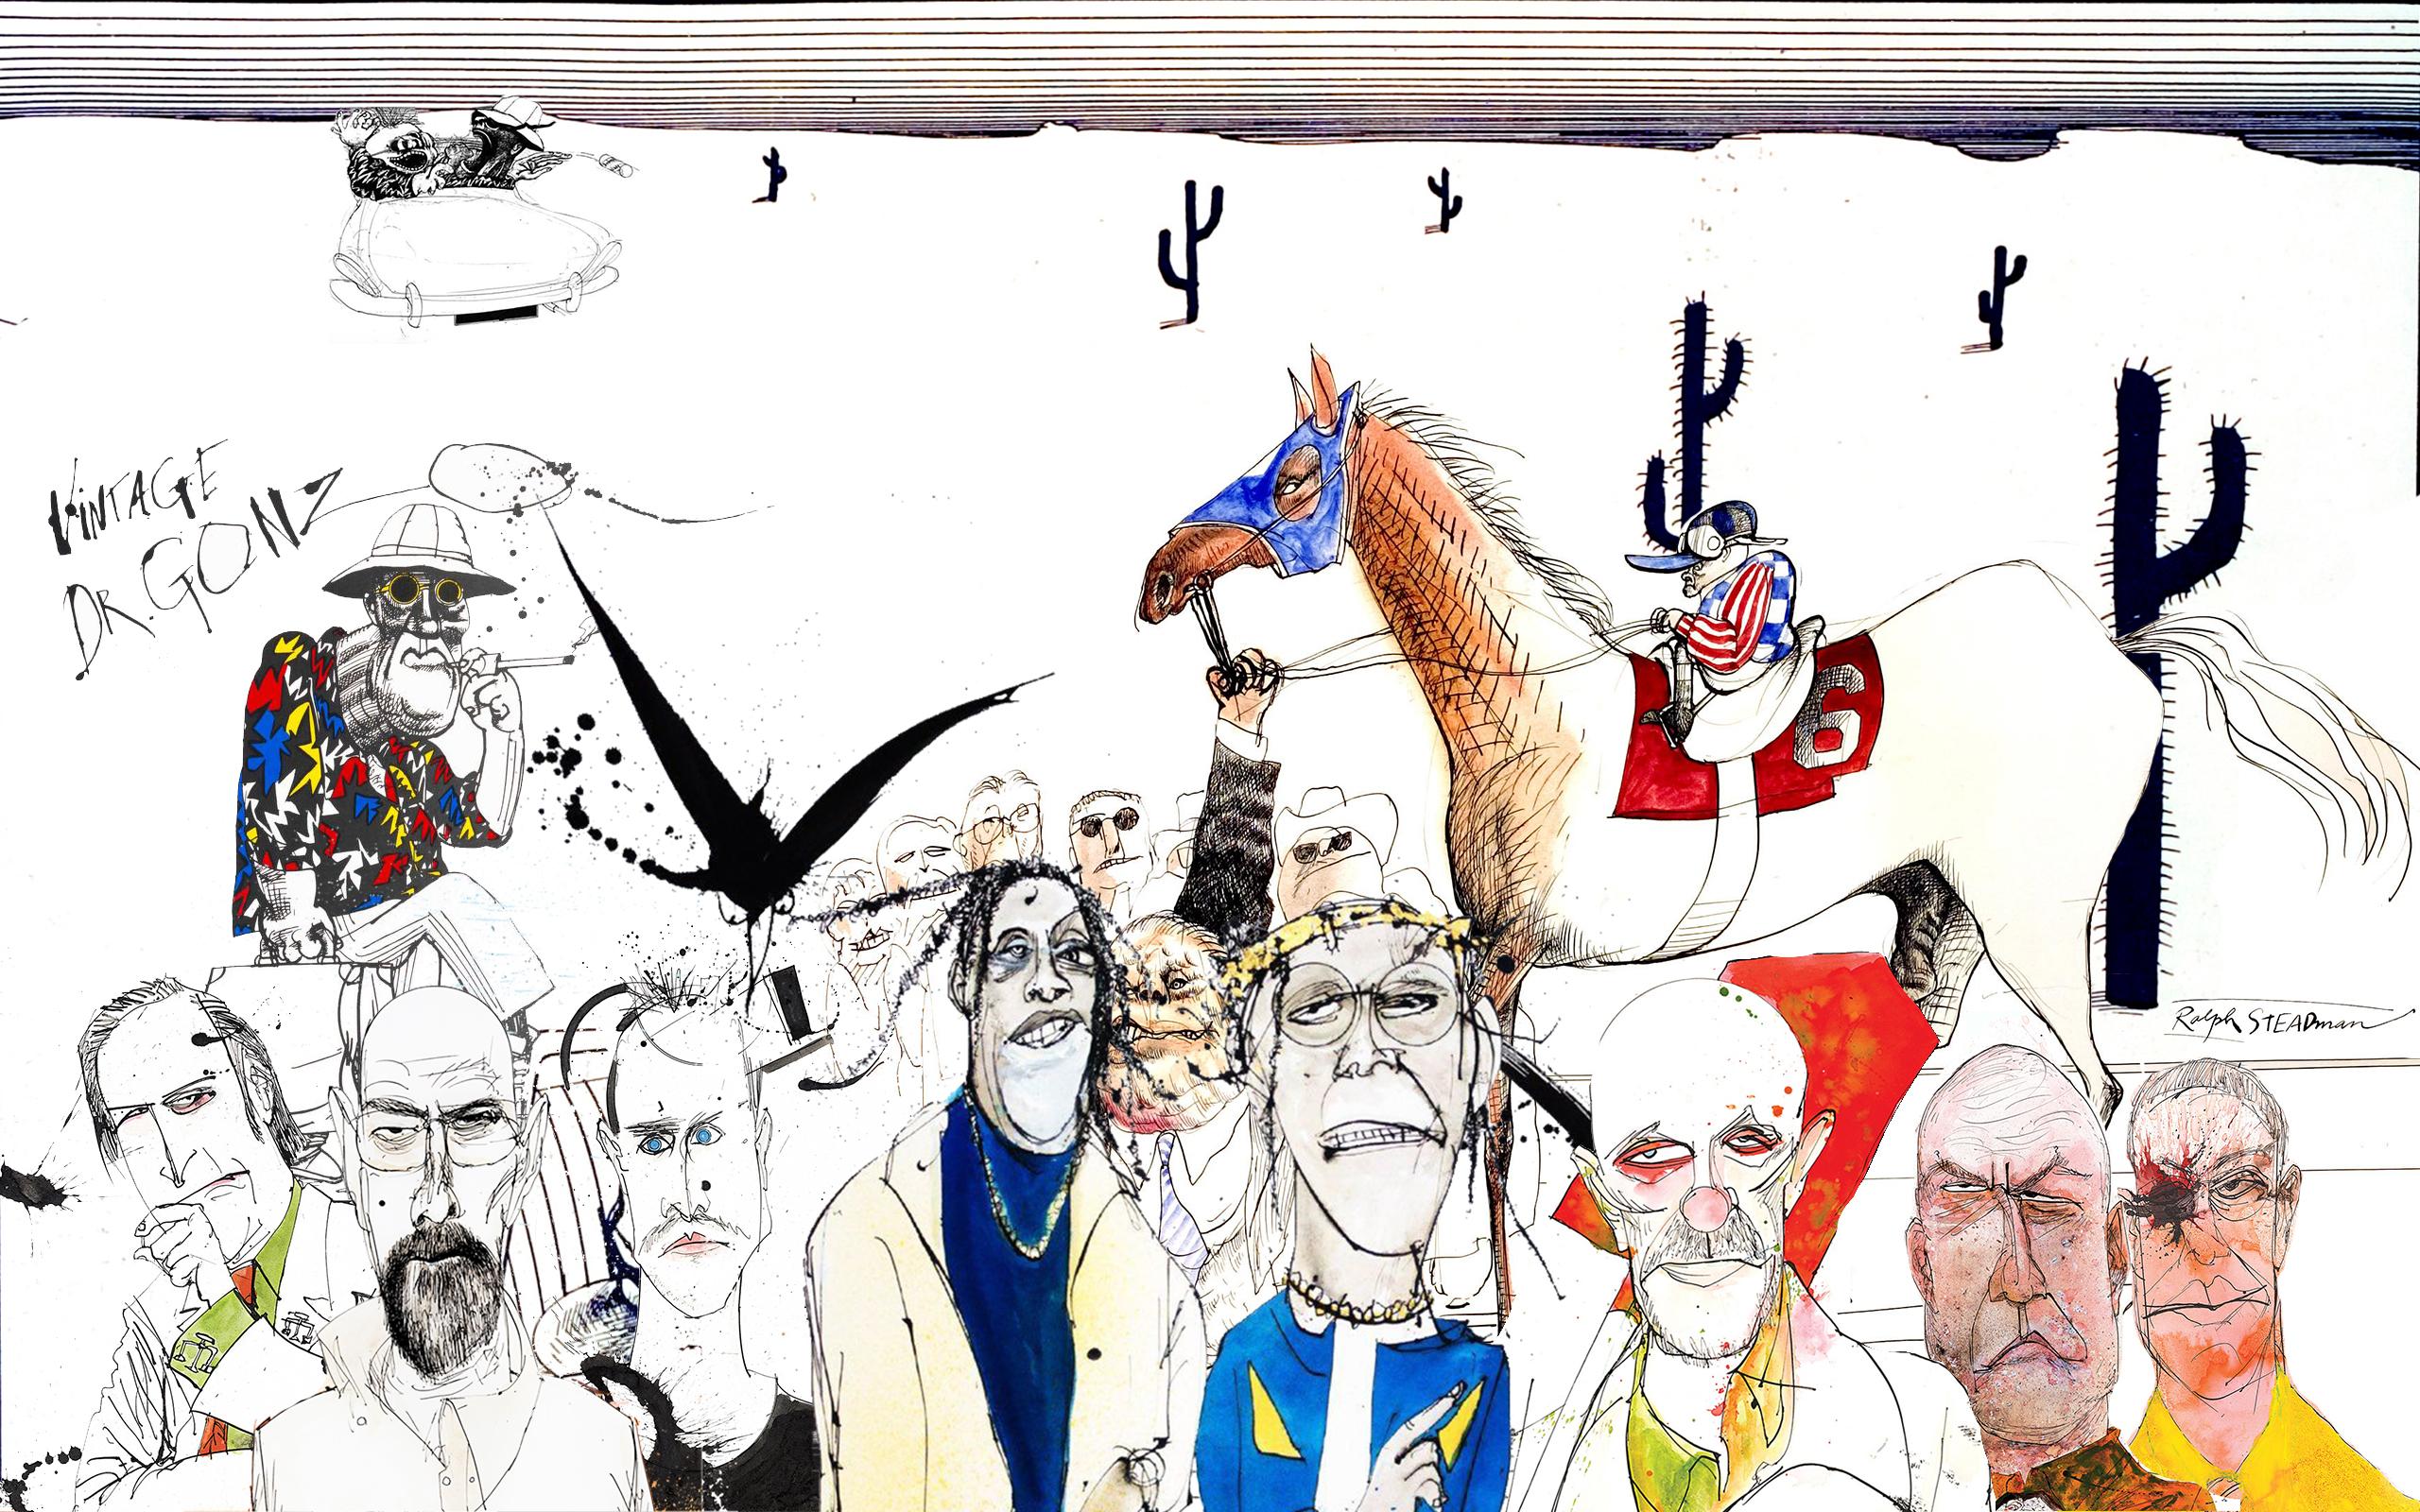 I made a wallpaper collage out of some Steadman art